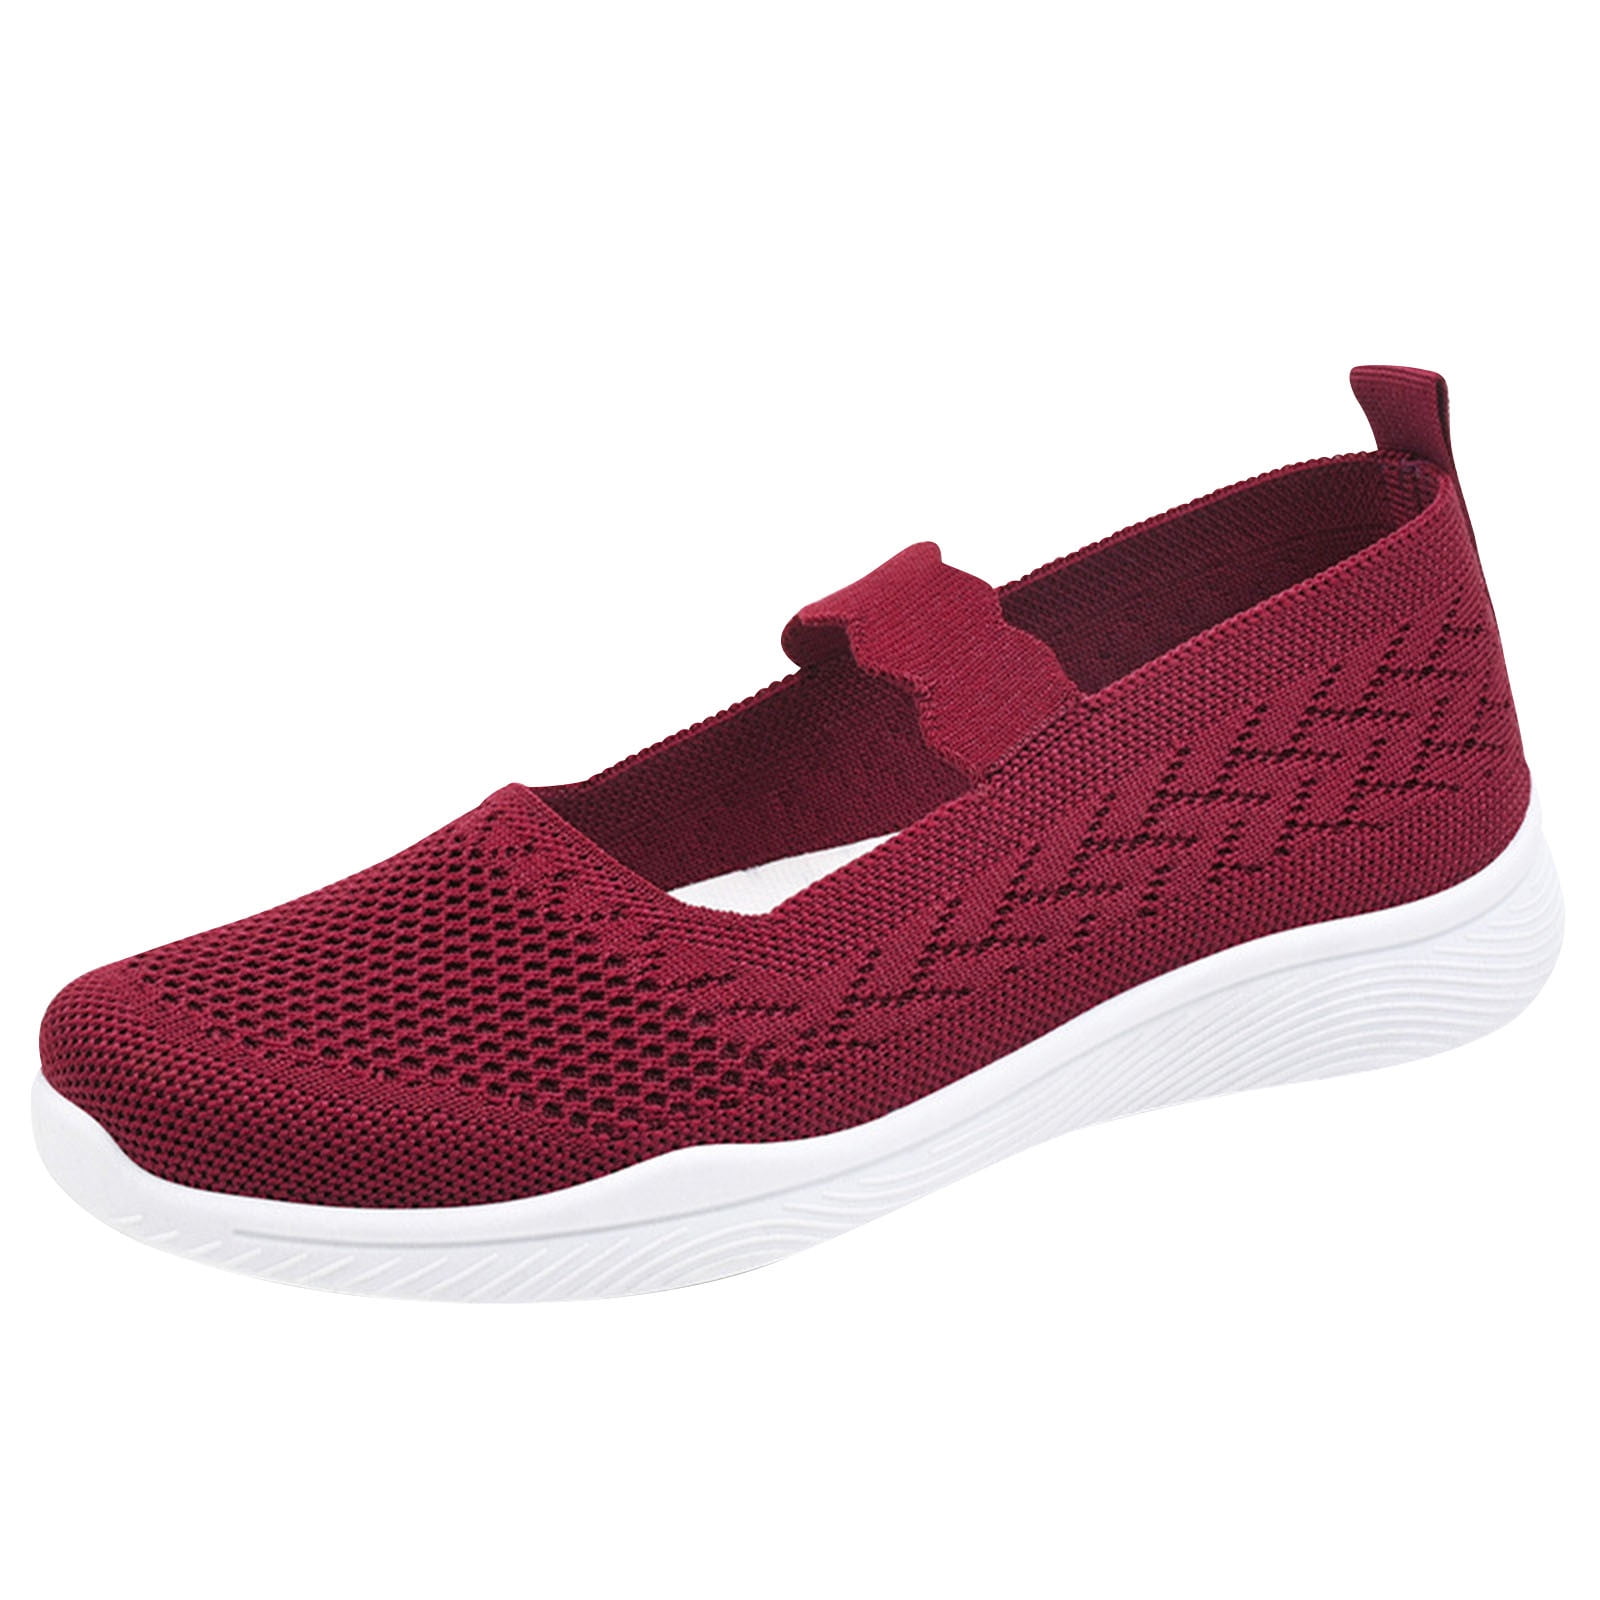 JINMGG Sneakers for Women Plus Clearance Cloth Shoes Women New Mesh Breathable Comfortable Soft Bottom Non-Slip Flats Red 36 - Walmart.com